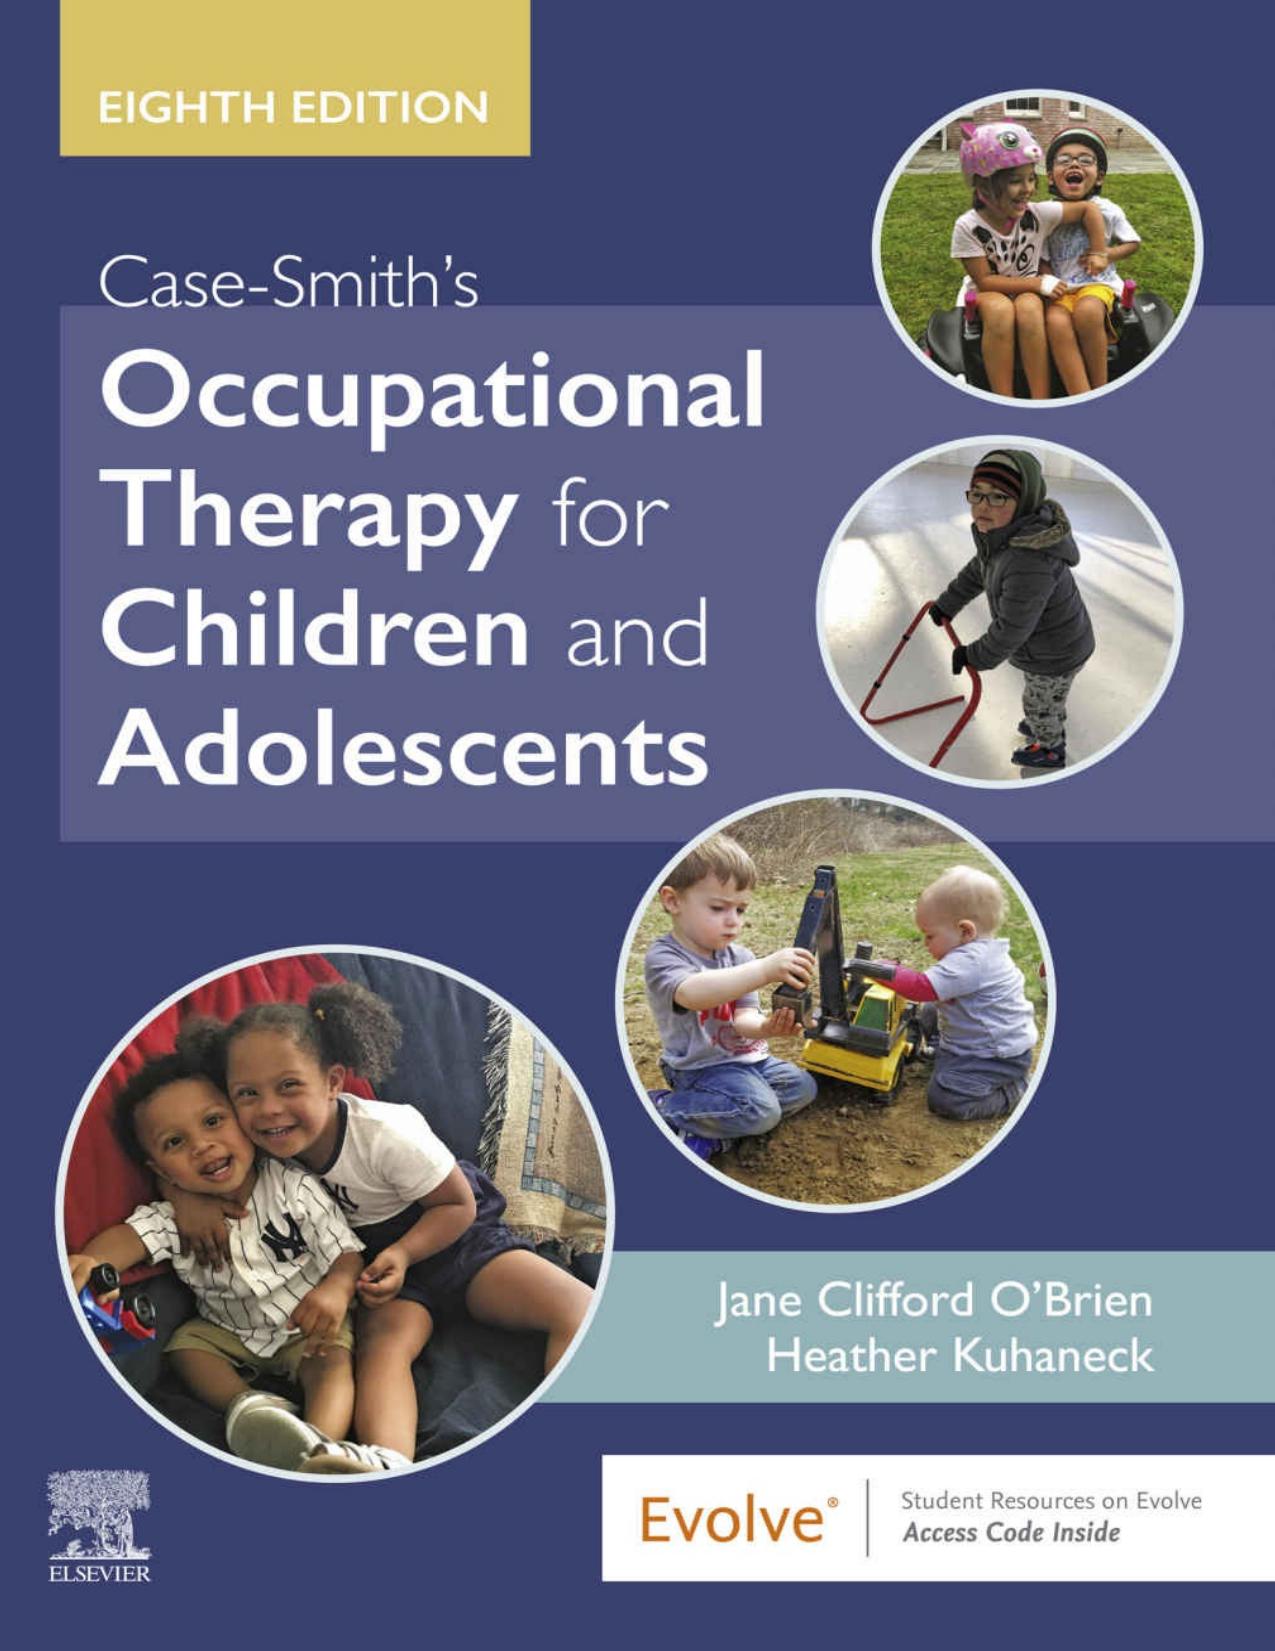 (eBook PDF)Case-Smith s Occupational Therapy for Children and Adolescents 8th by Jane Clifford O Brien, Heather Kuhaneck